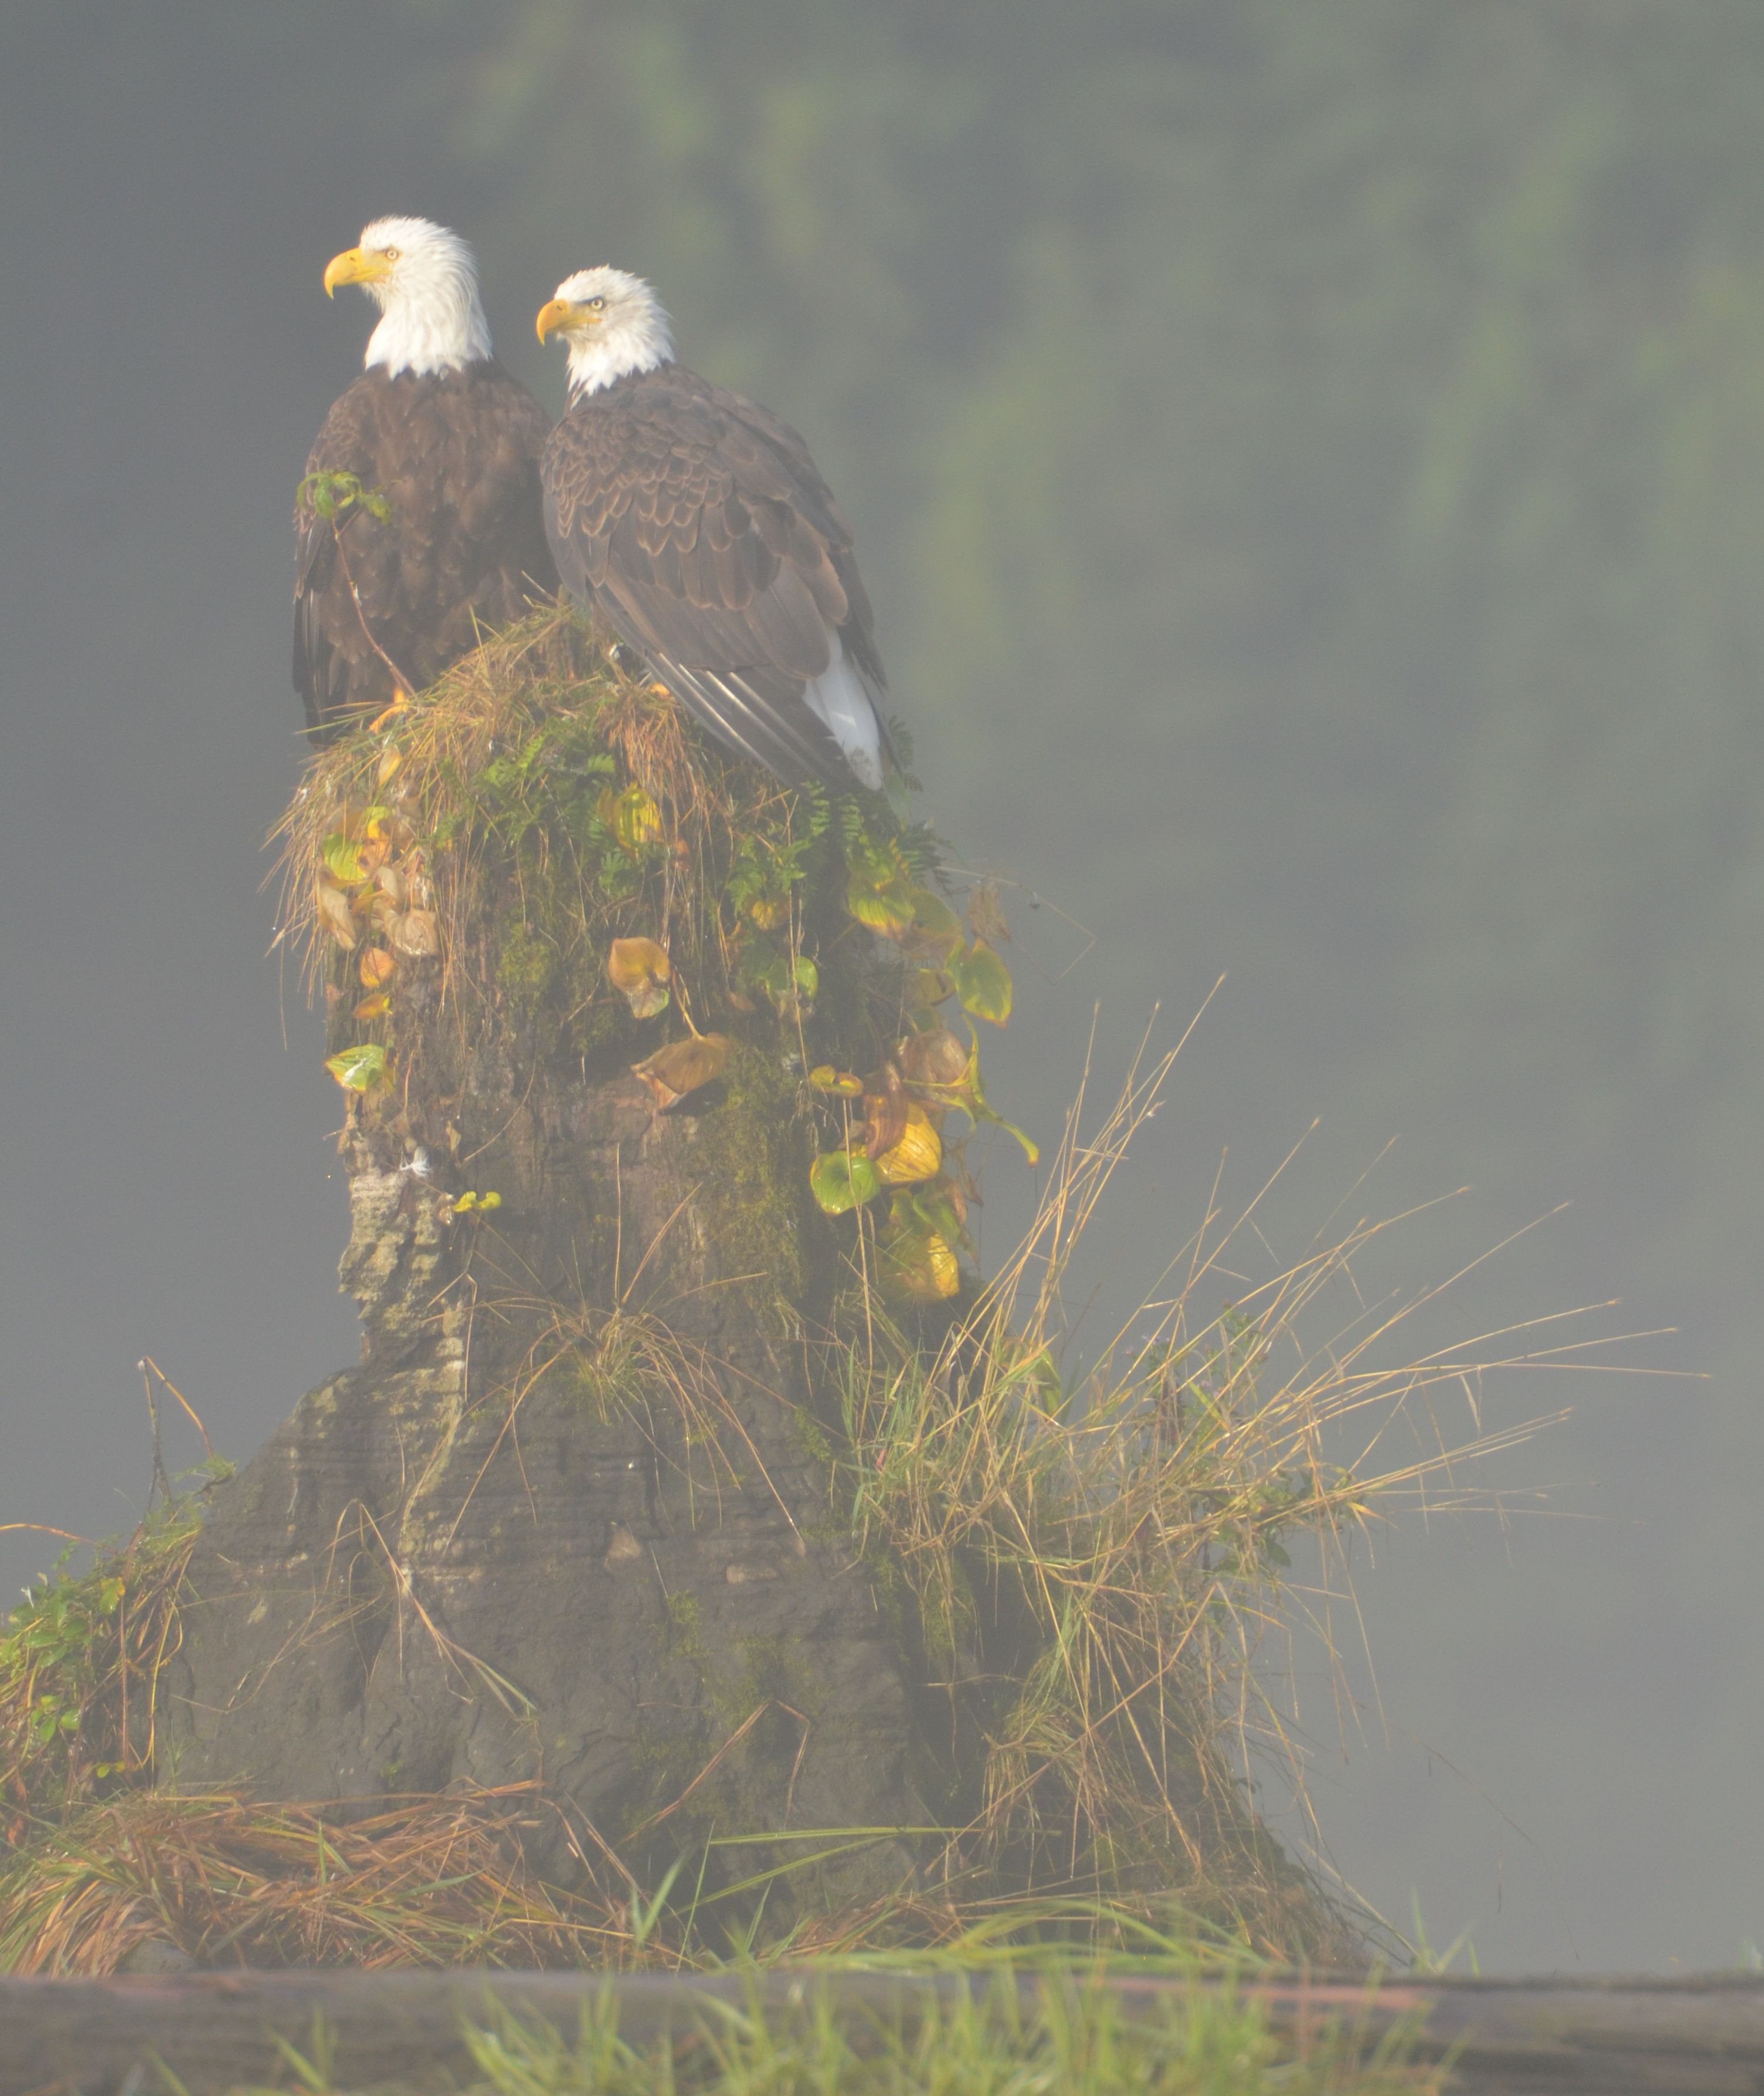 Eagles in the mist, Khutze Inlet. Photo by Cristina Eisenberg.